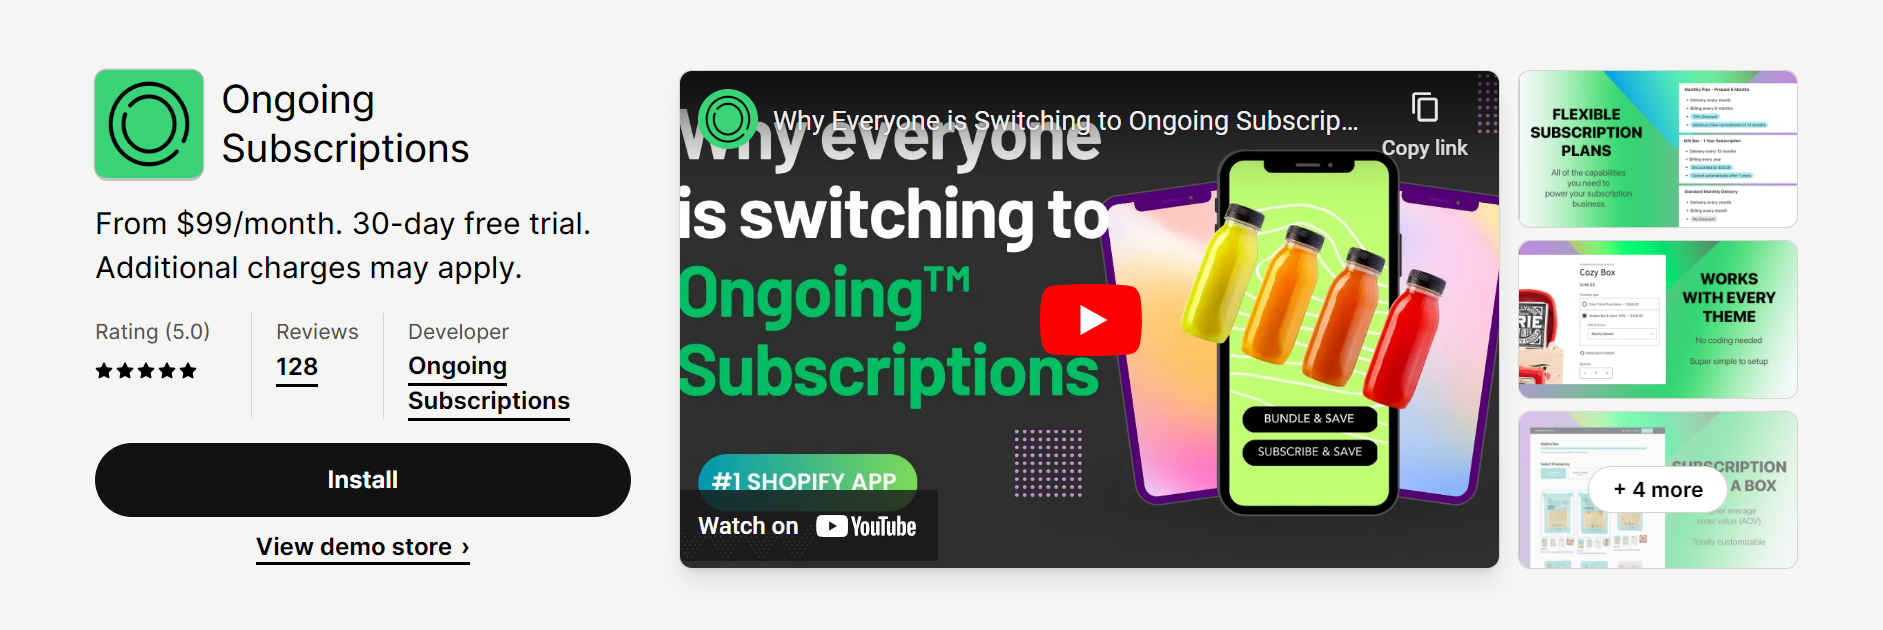 Ongoing Subscriptions